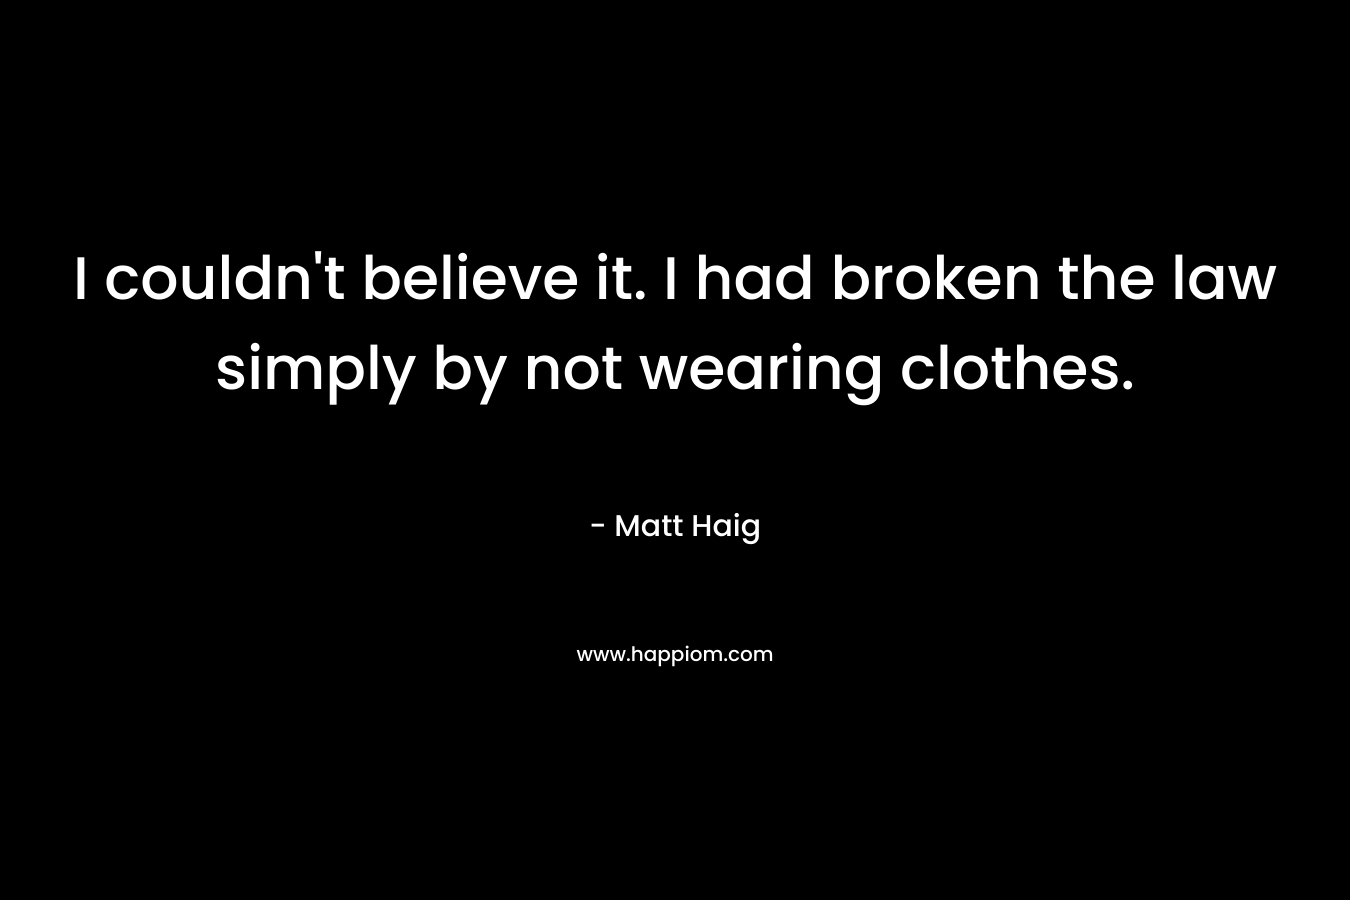 I couldn’t believe it. I had broken the law simply by not wearing clothes. – Matt Haig